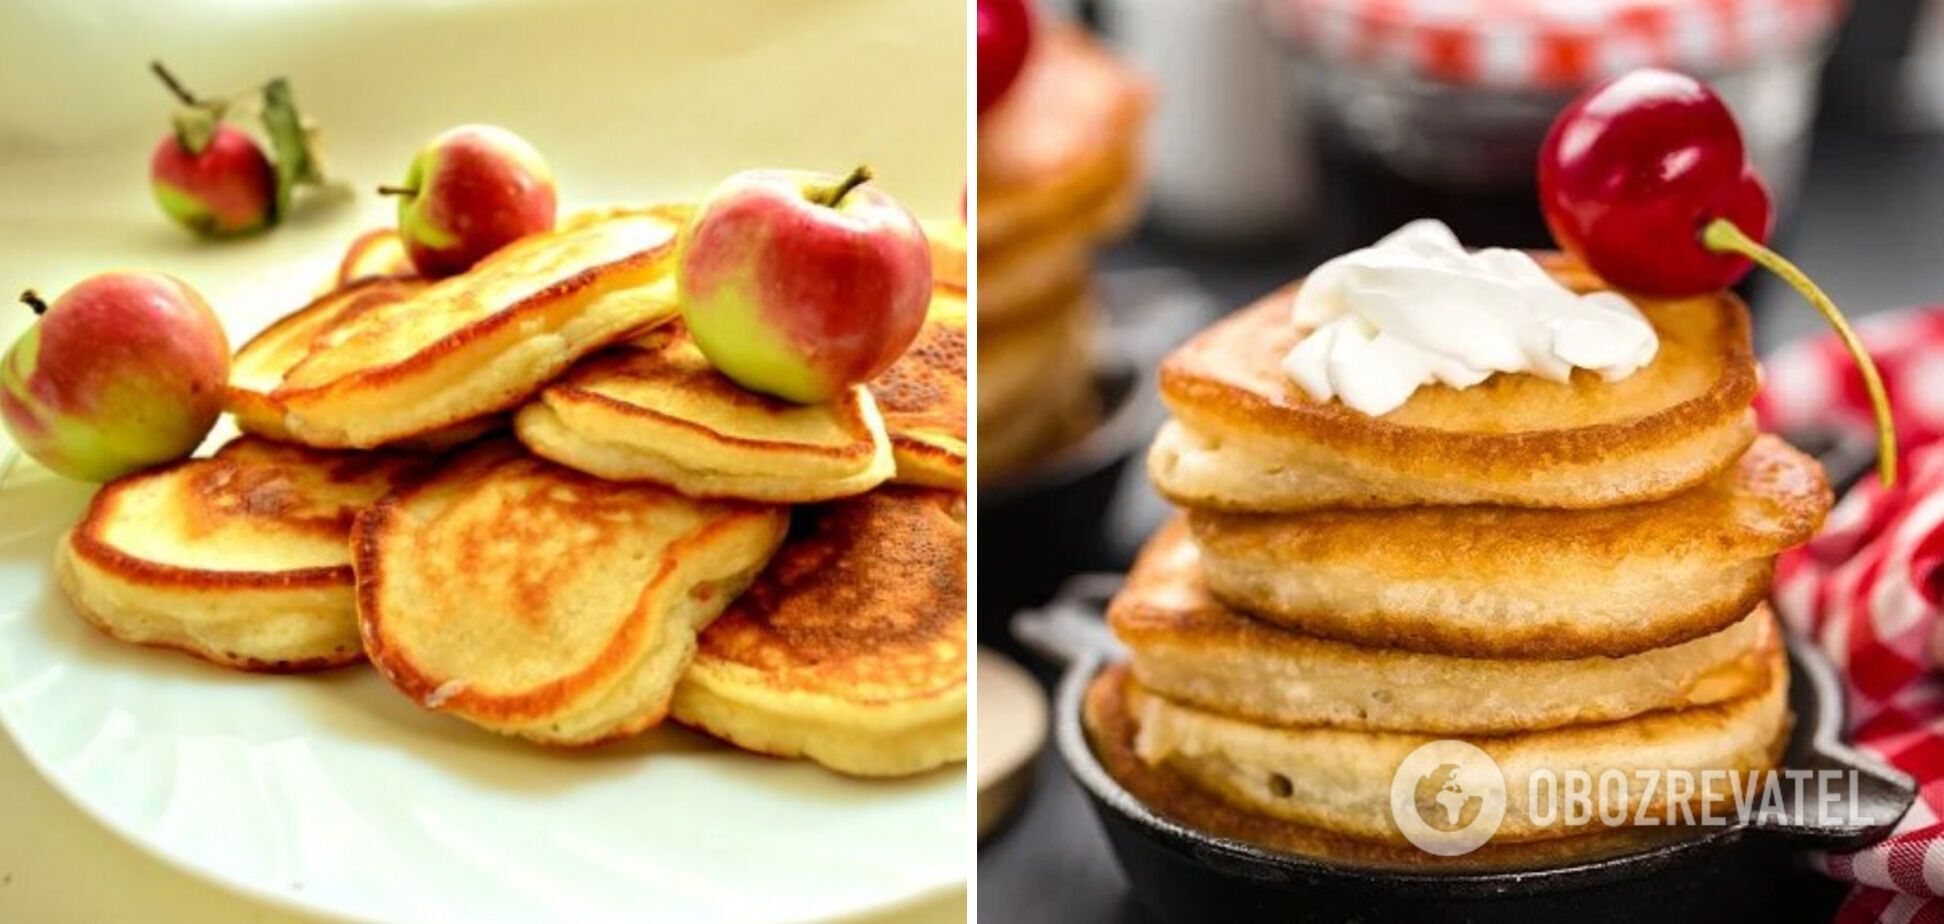 Apple pancakes with milk and yeast